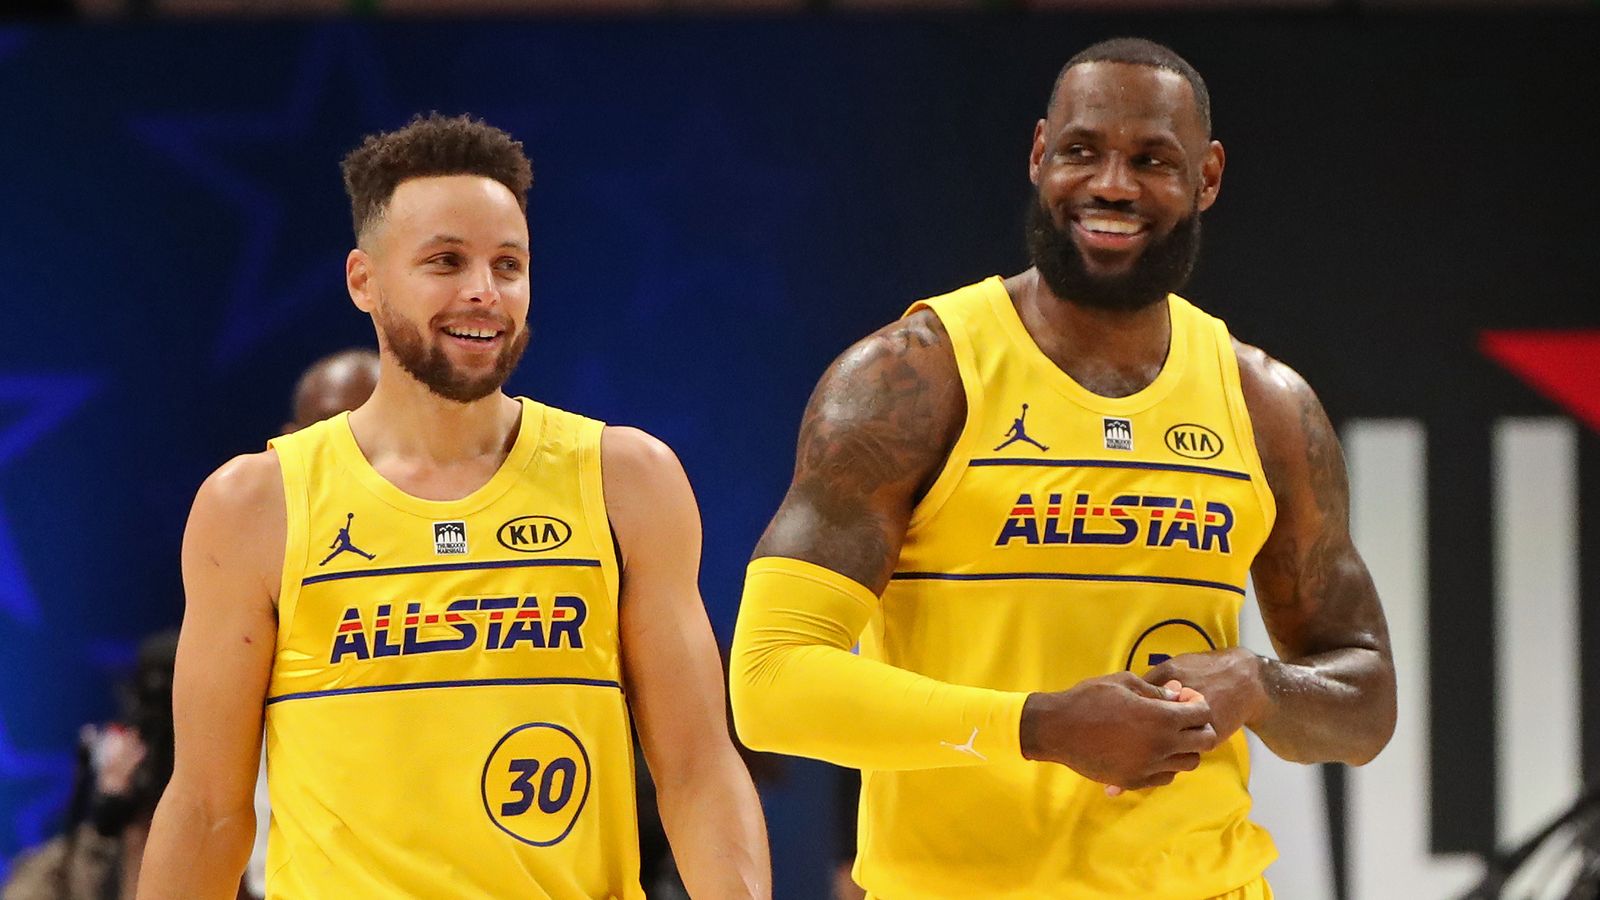 Steph Curry and LeBron James' natural chemistry: Seven things we